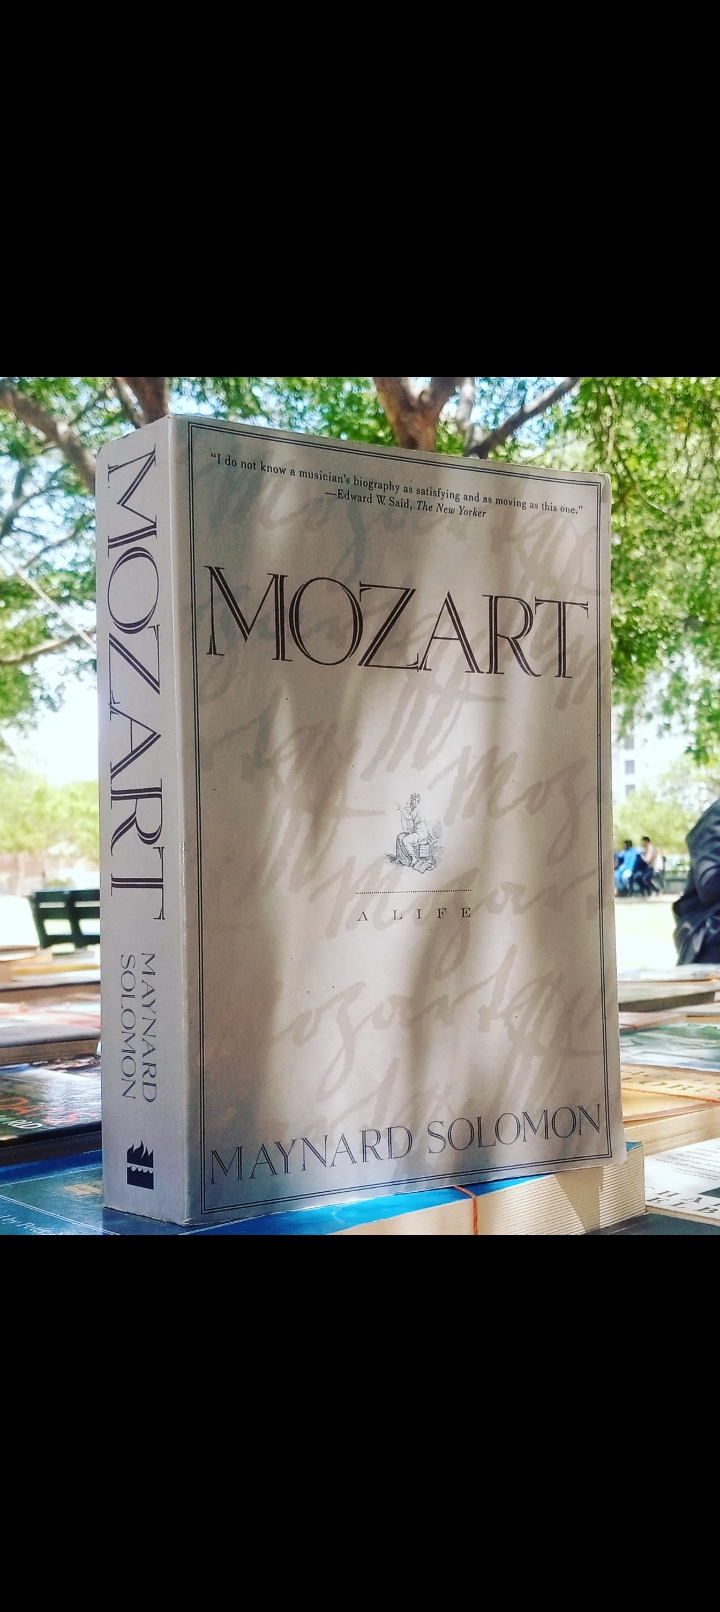 mozart a life"i dnt know a musician's biography as satisfying and as moving as this one" by maynard 